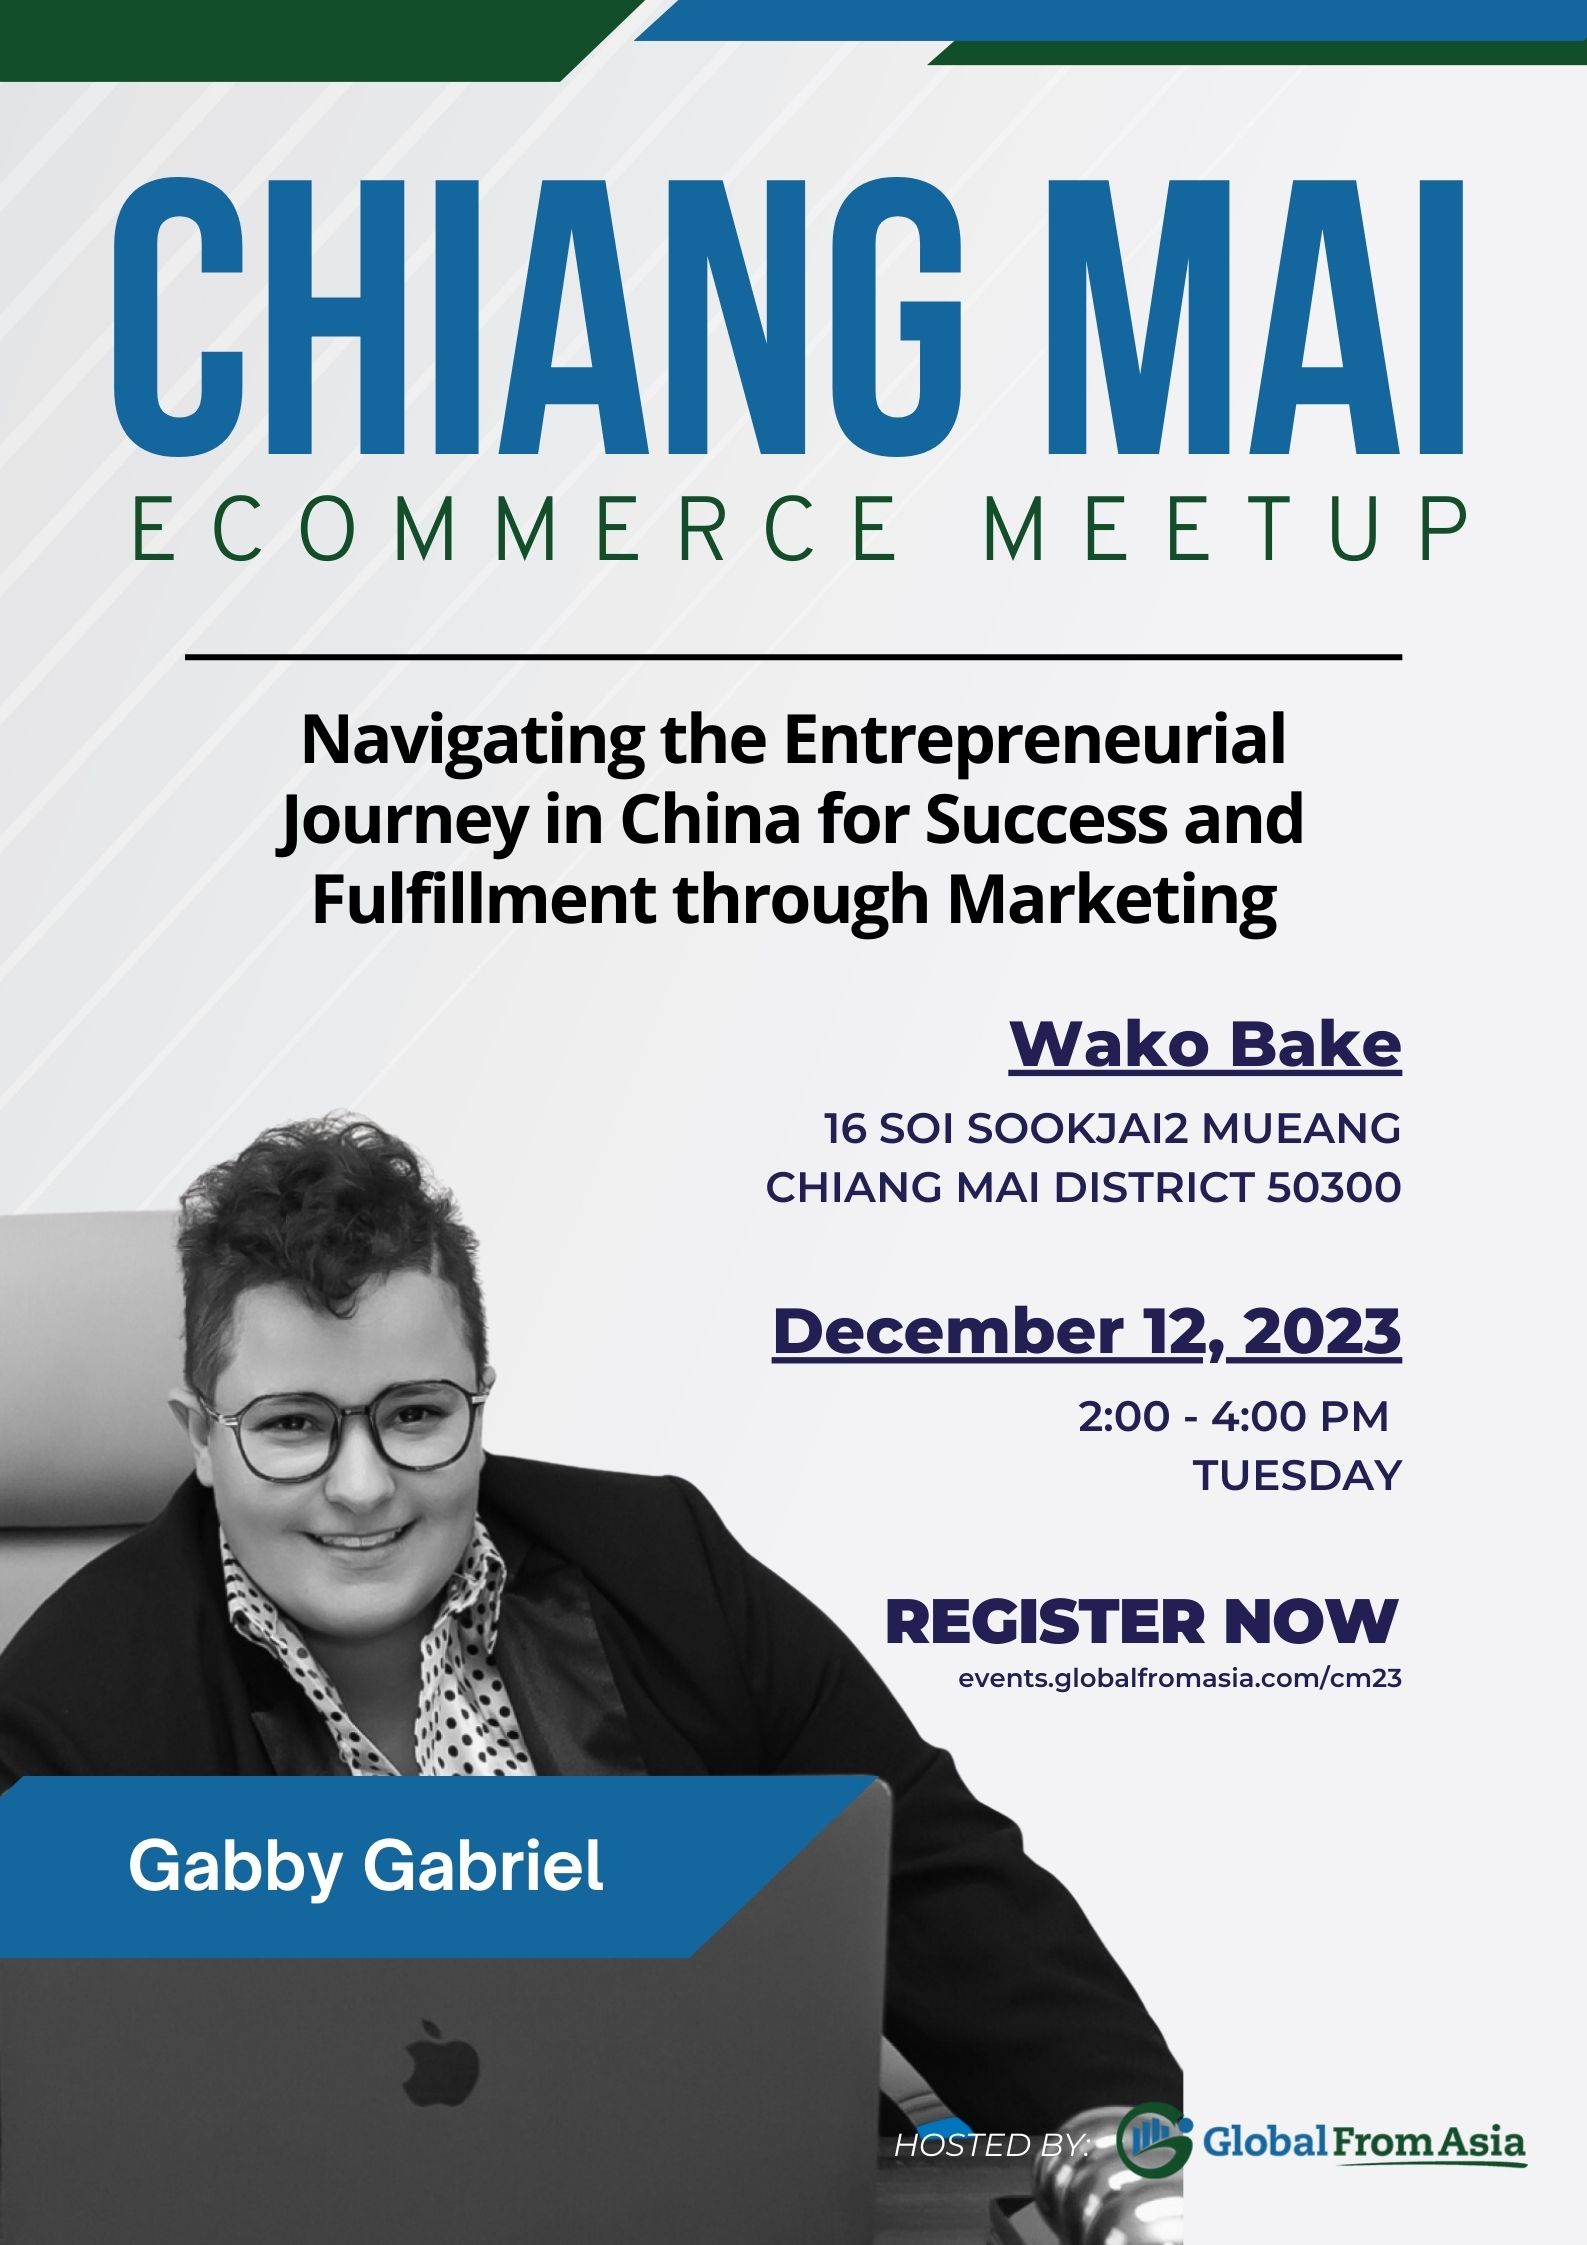 Chiang Mai Meetup: Navigating the Entrepreneurial Journey in China for Success and Fulfillment through Marketing